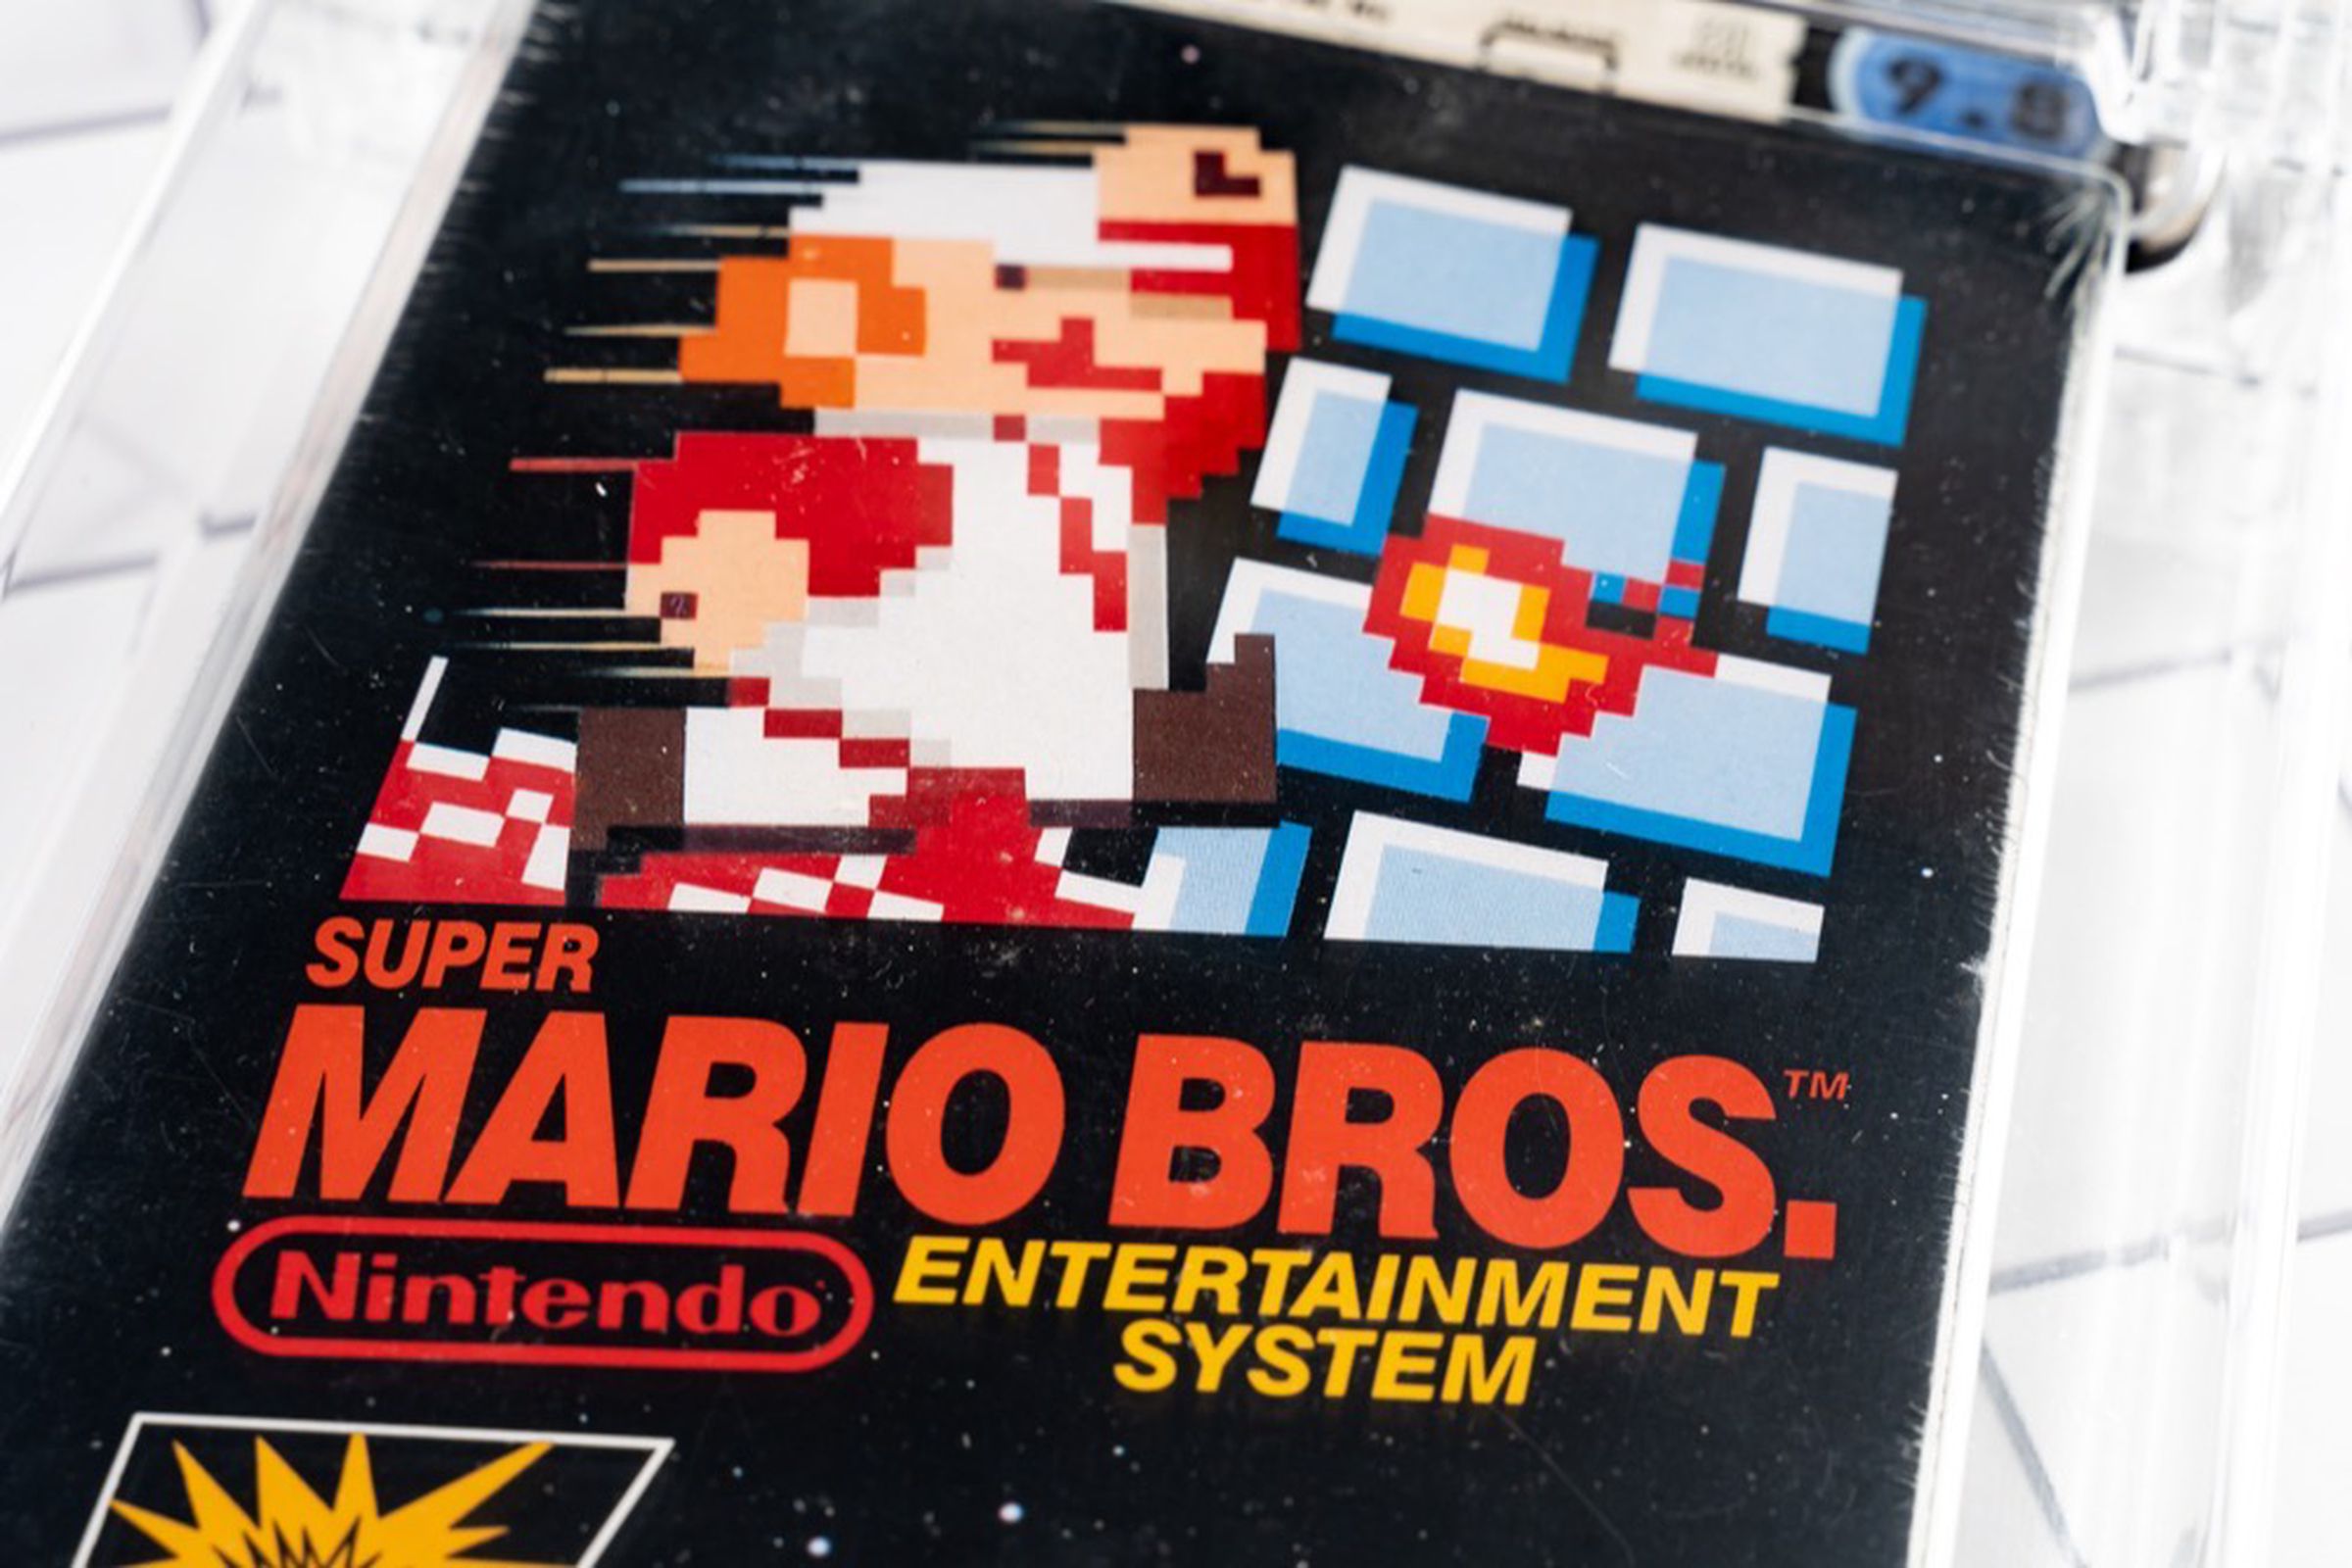 An unopened Super Mario Bros. game from 1985 sold for $2 million